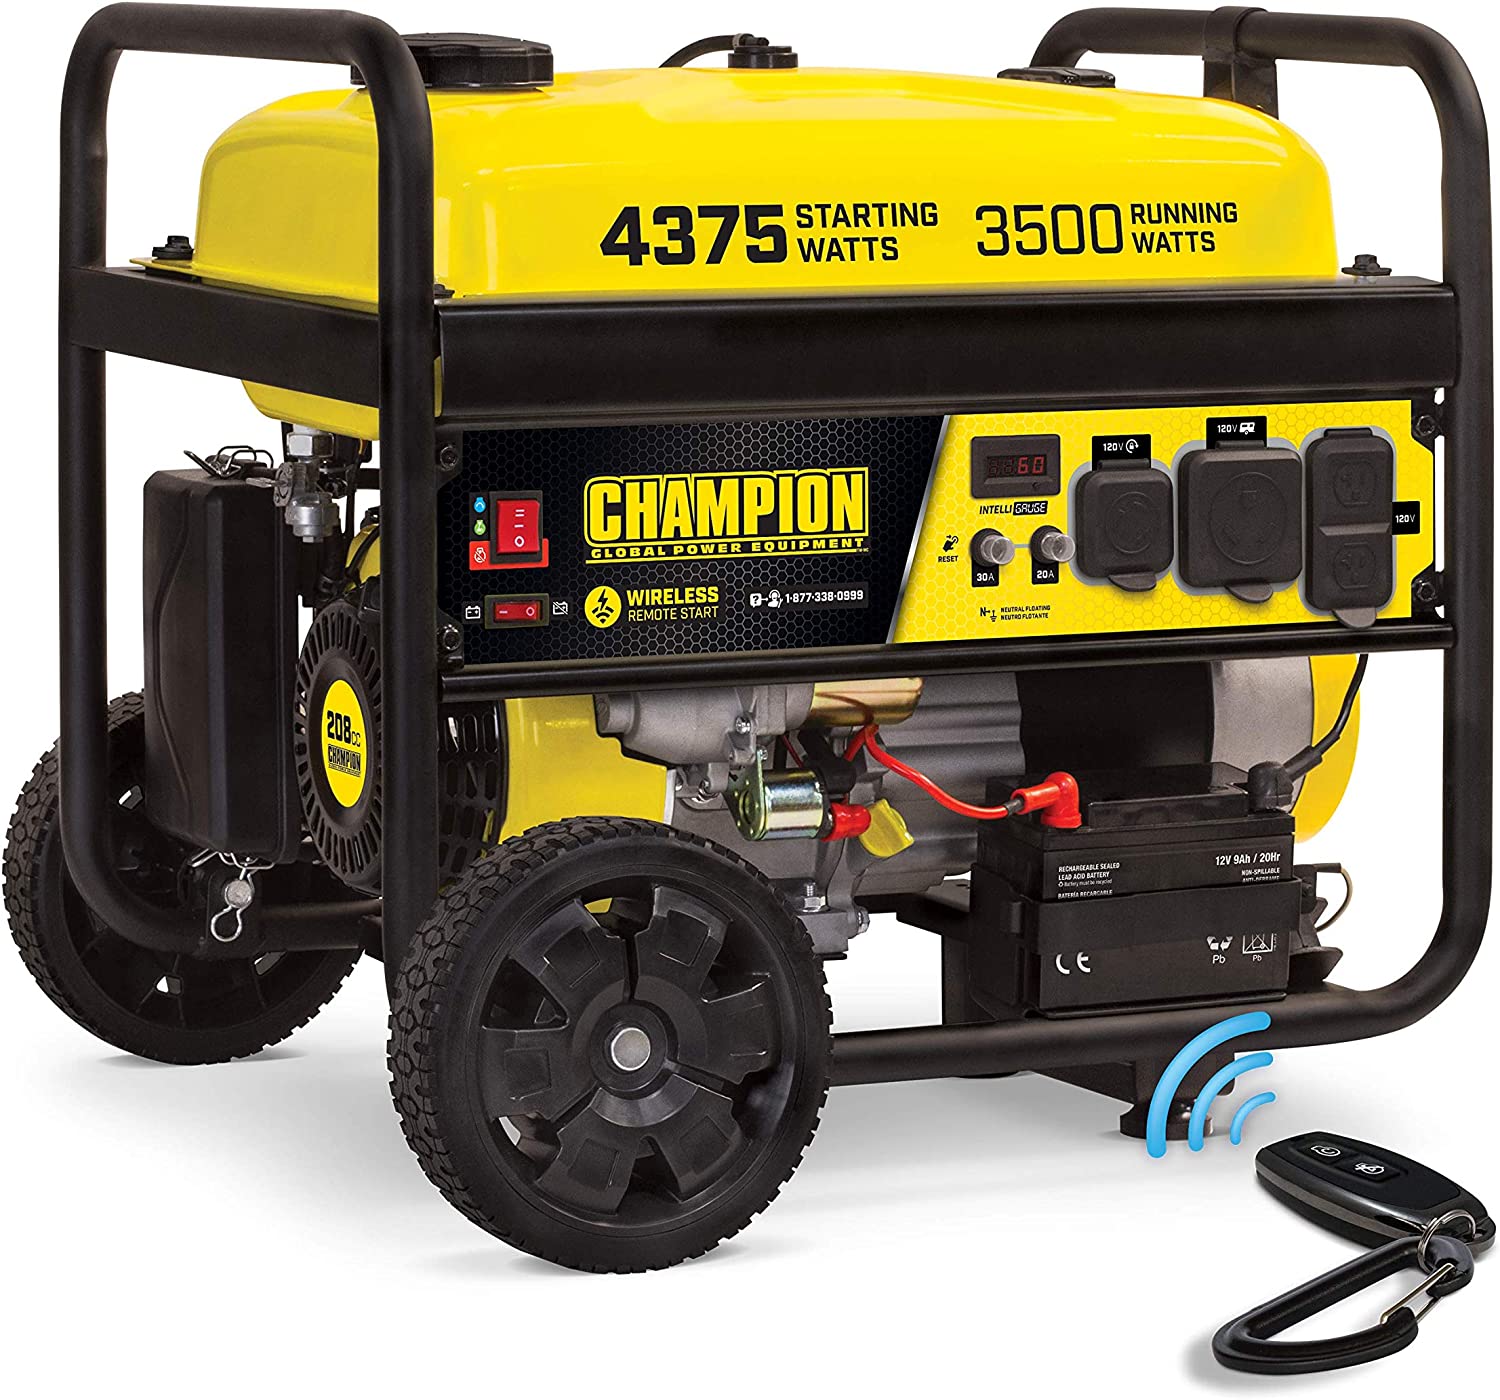 Best Amazon Black Friday Deals on Generators and Household Essentials